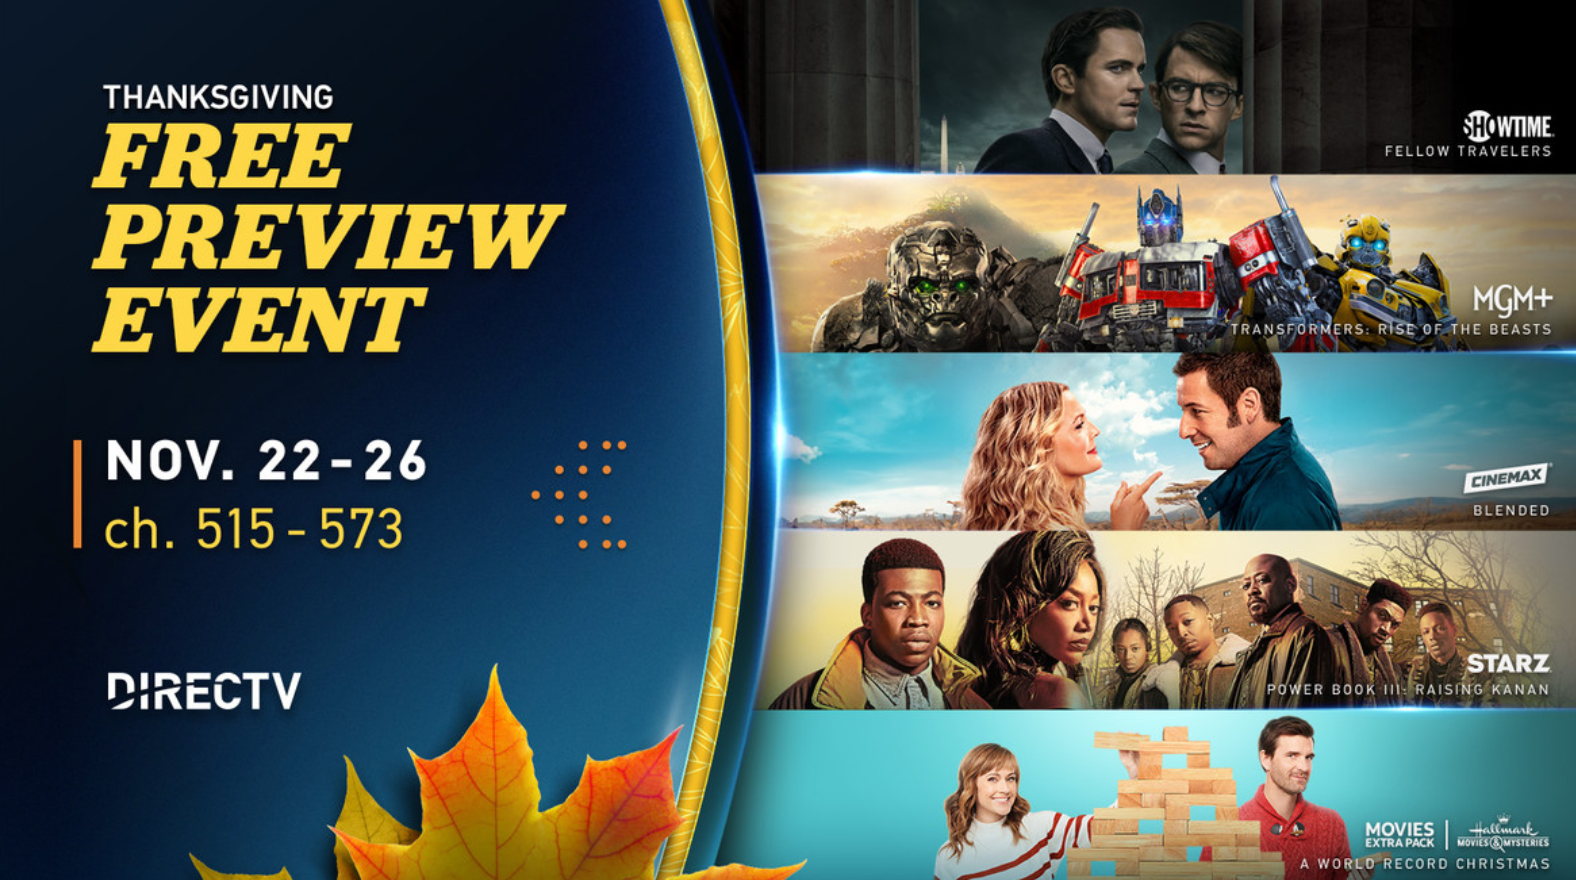 DIRECTV’s Thanksgiving Free Preview Event Returns With Showtime, MGM+, Cinemax, Starz, and Movies Extra Pack